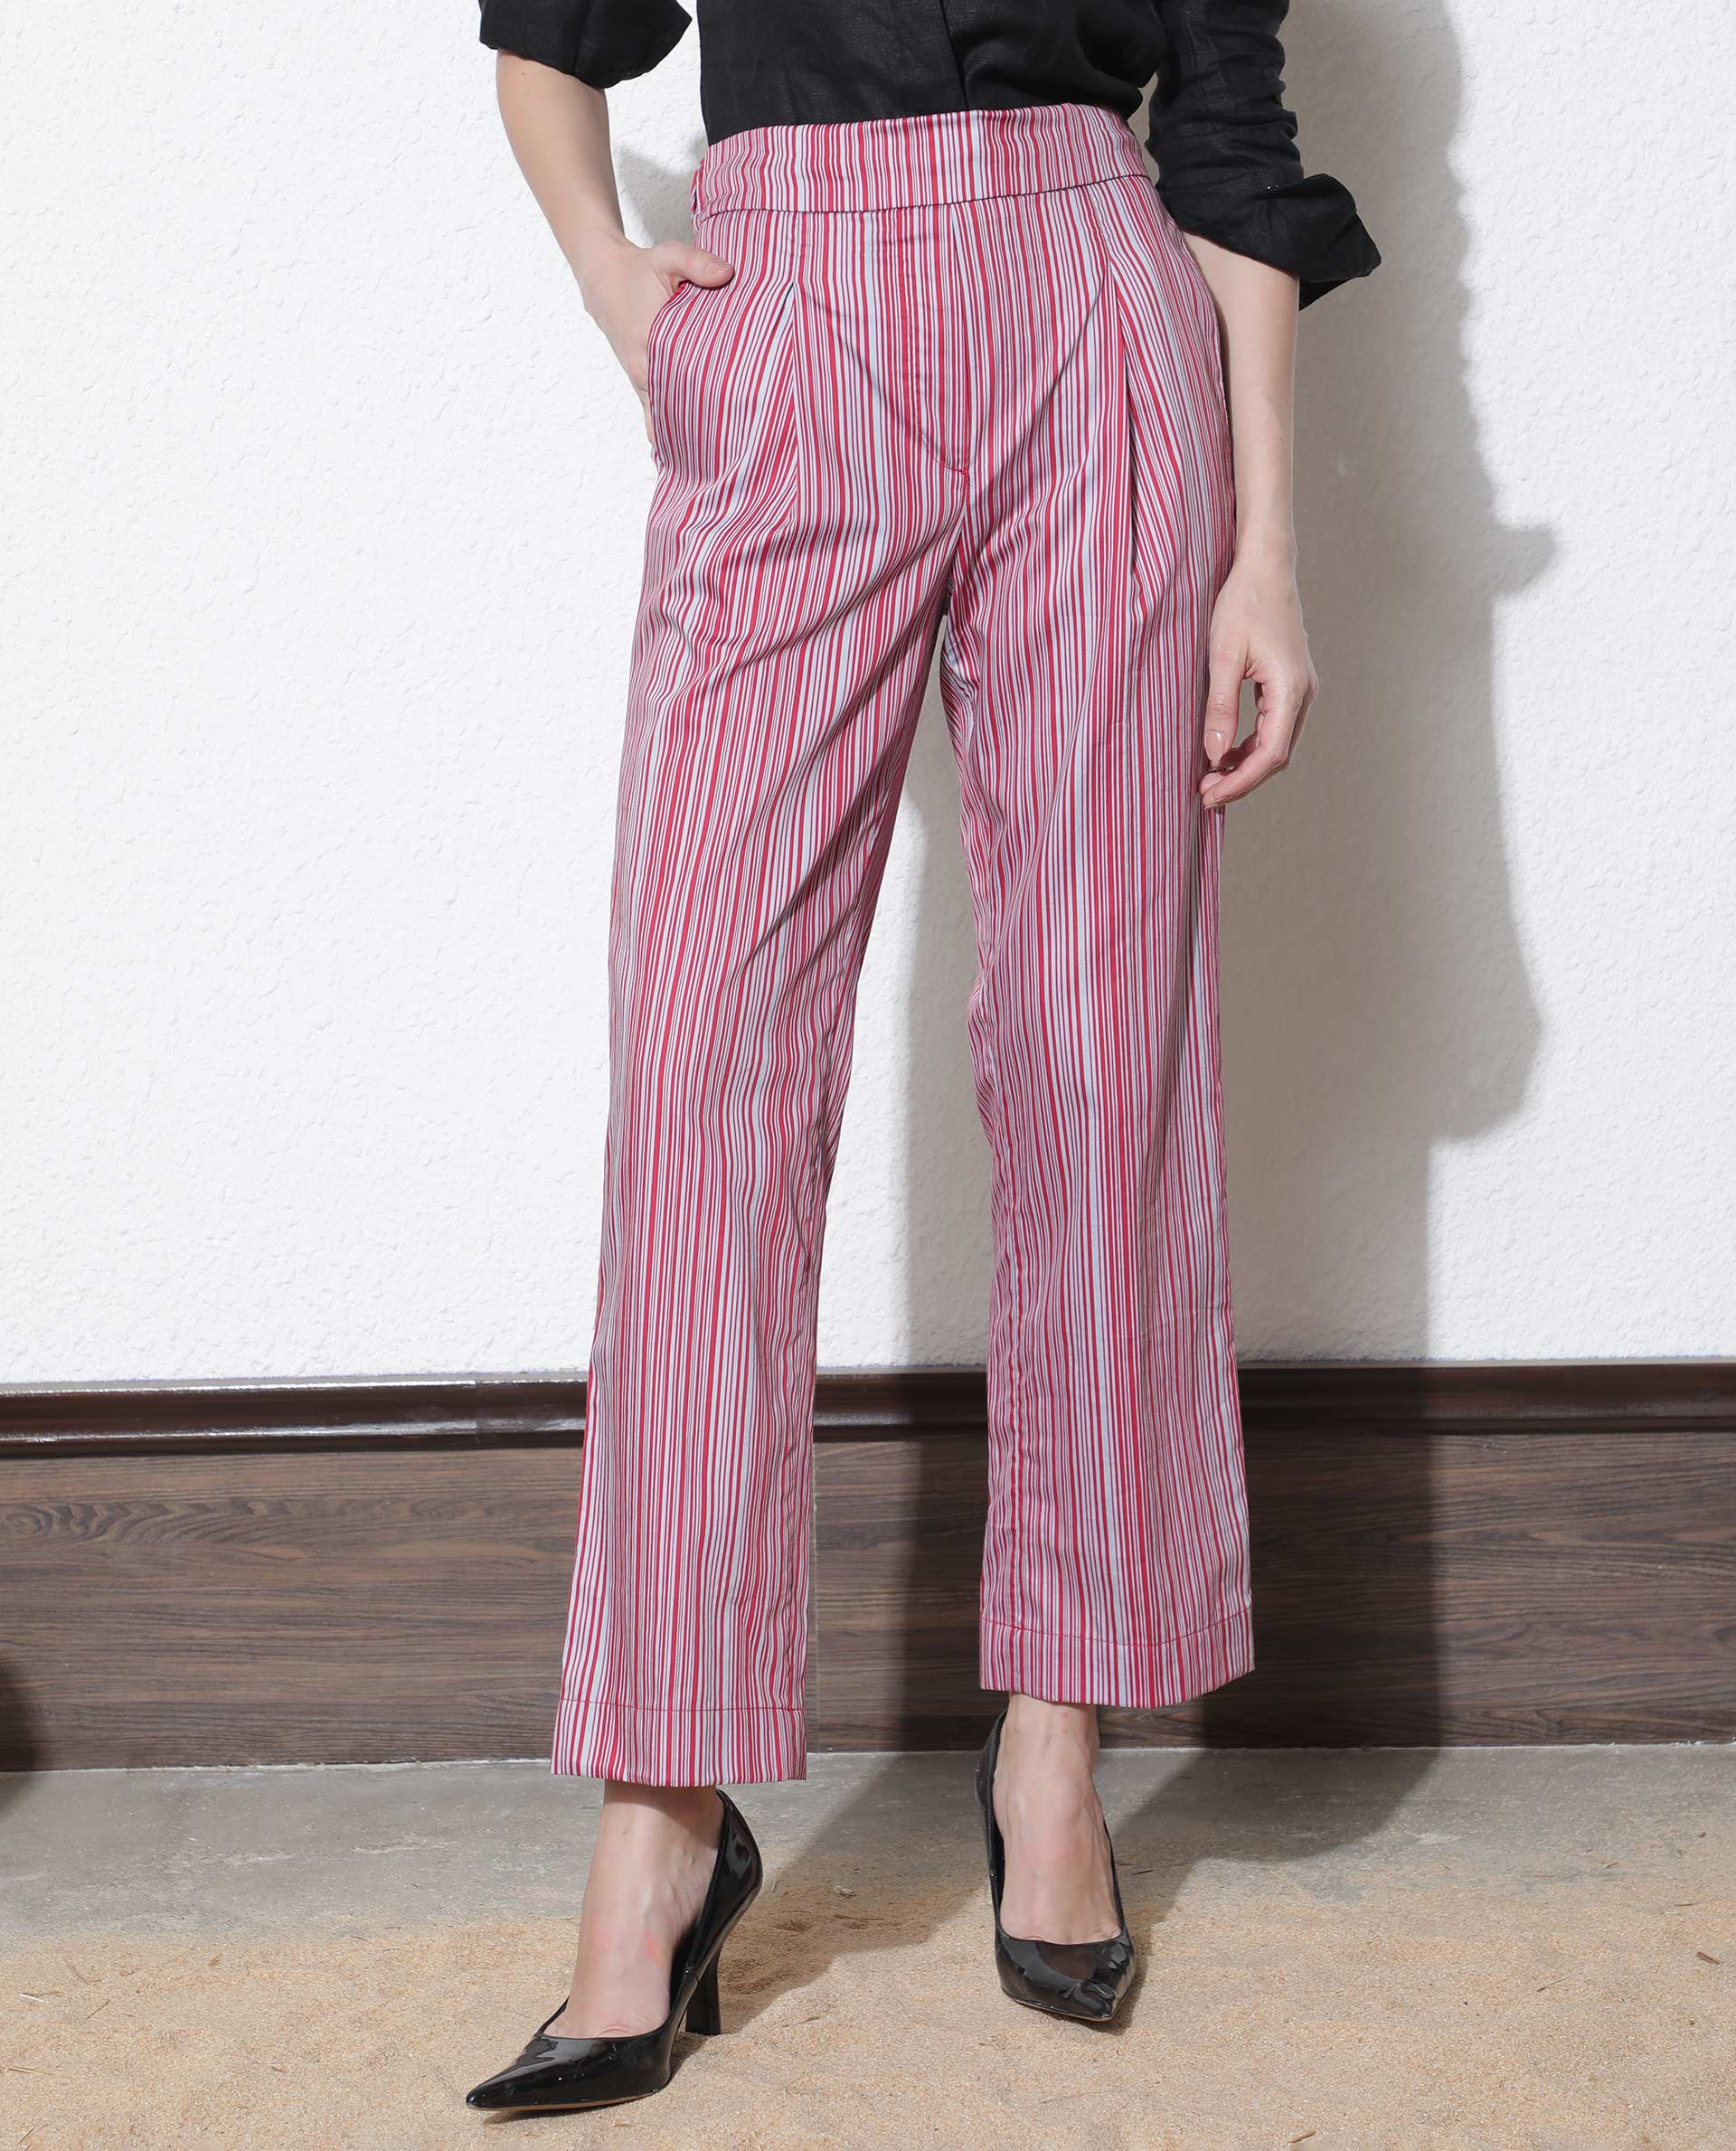 Stylish Striped Girls Baggy Pants For Autumn Fashion Sizes 2 8 Years From  Originality11, $60.42 | DHgate.Com